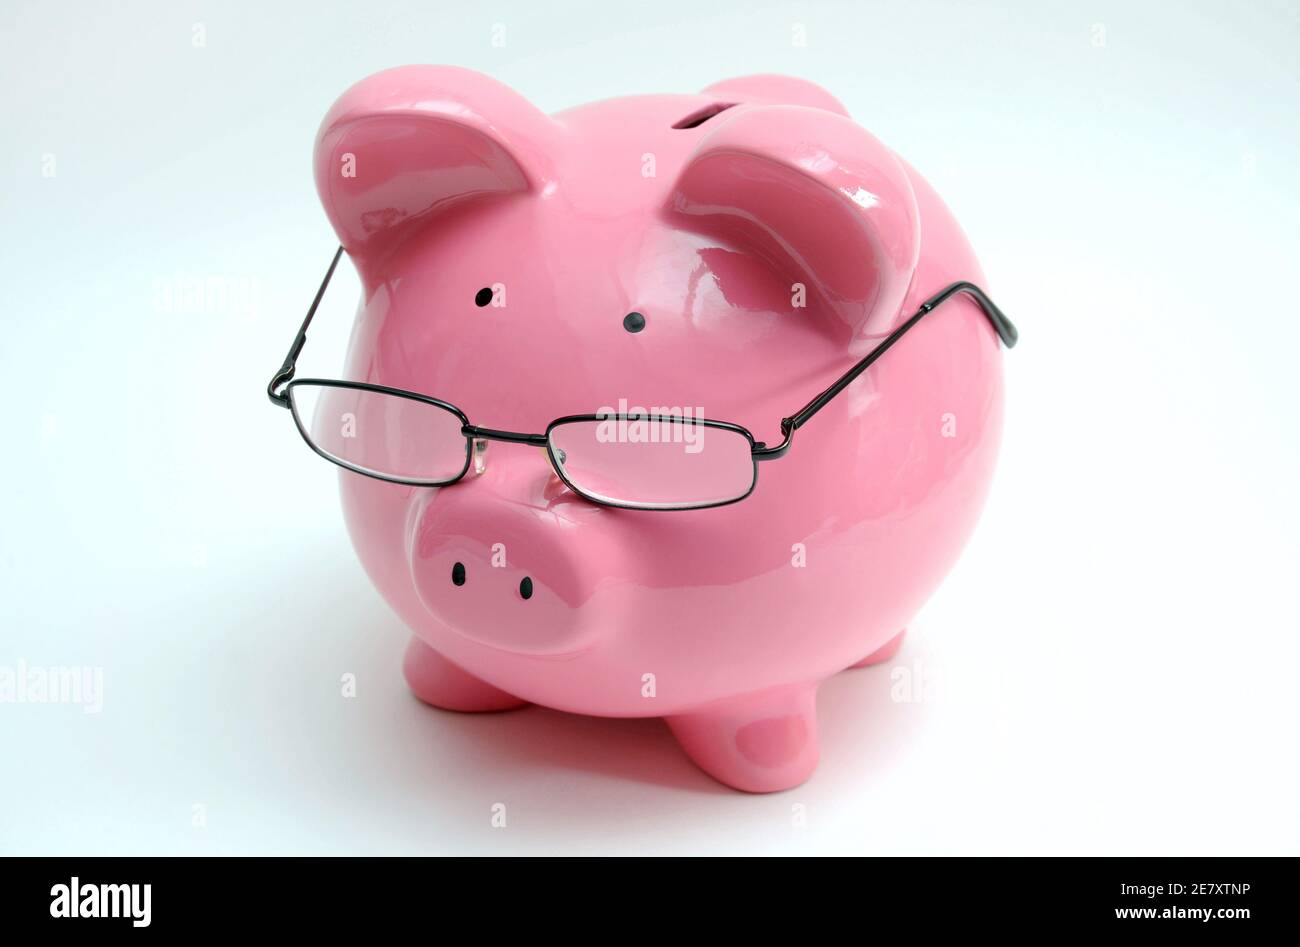 PIGGY BANK WEARING SPECTACLES RE SAVINGS RETIREMENT PLAN PENSIONS OLD AGE ETC UK Stock Photo